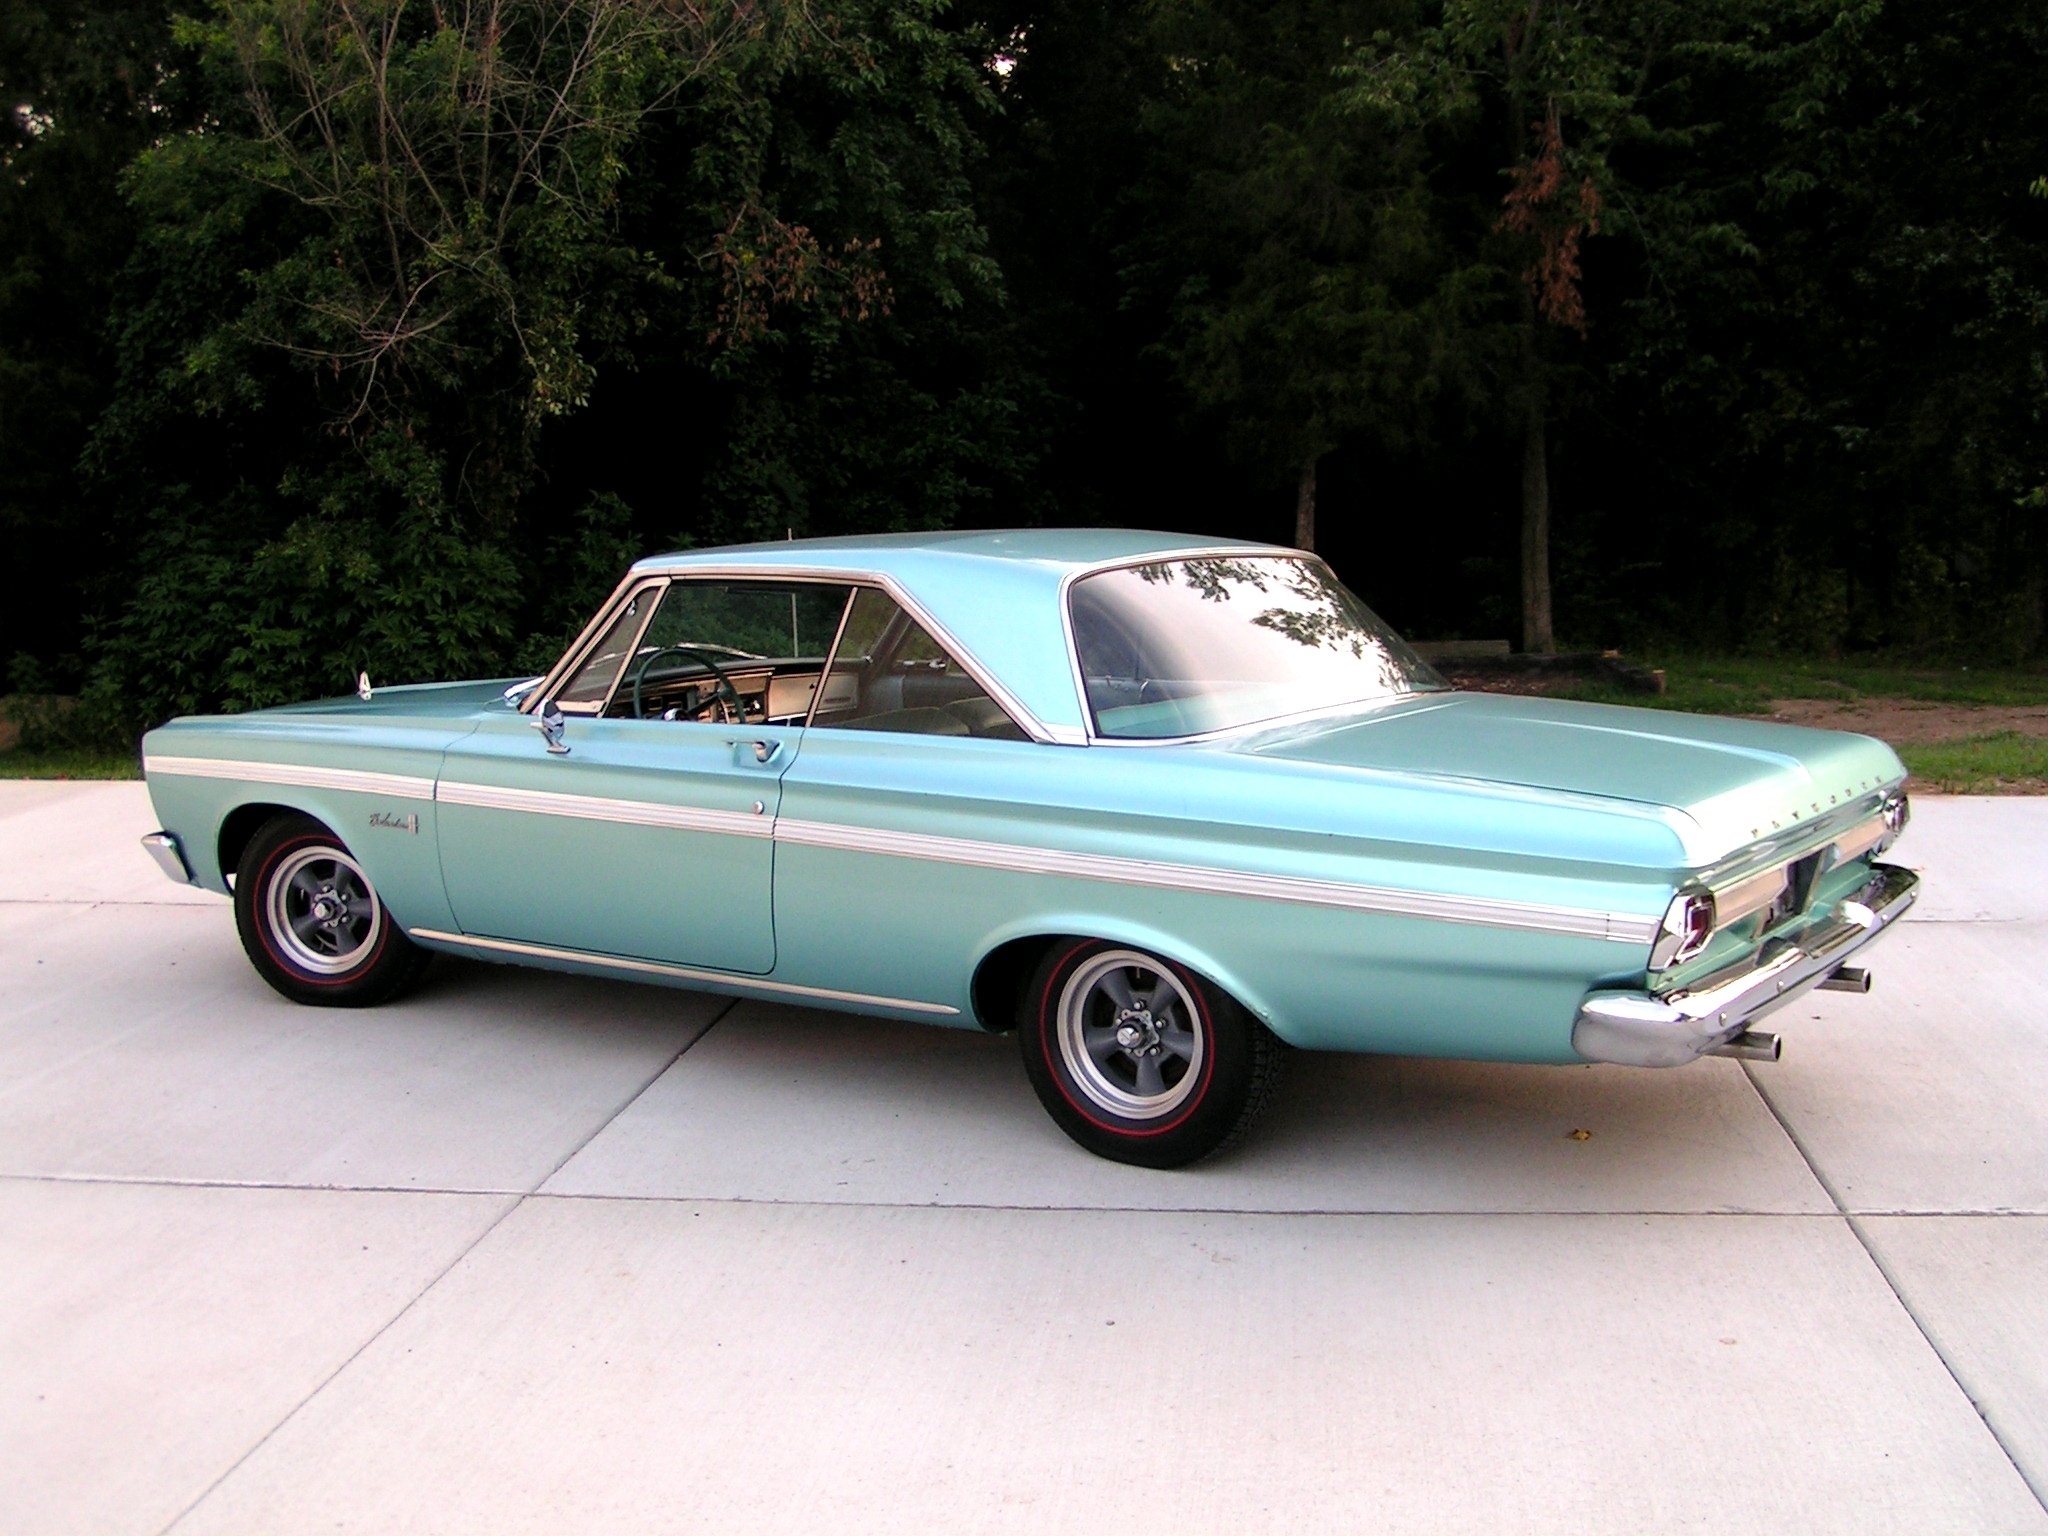 HQ 1964 Plymouth Belvedere Wallpapers | File 1611.05Kb